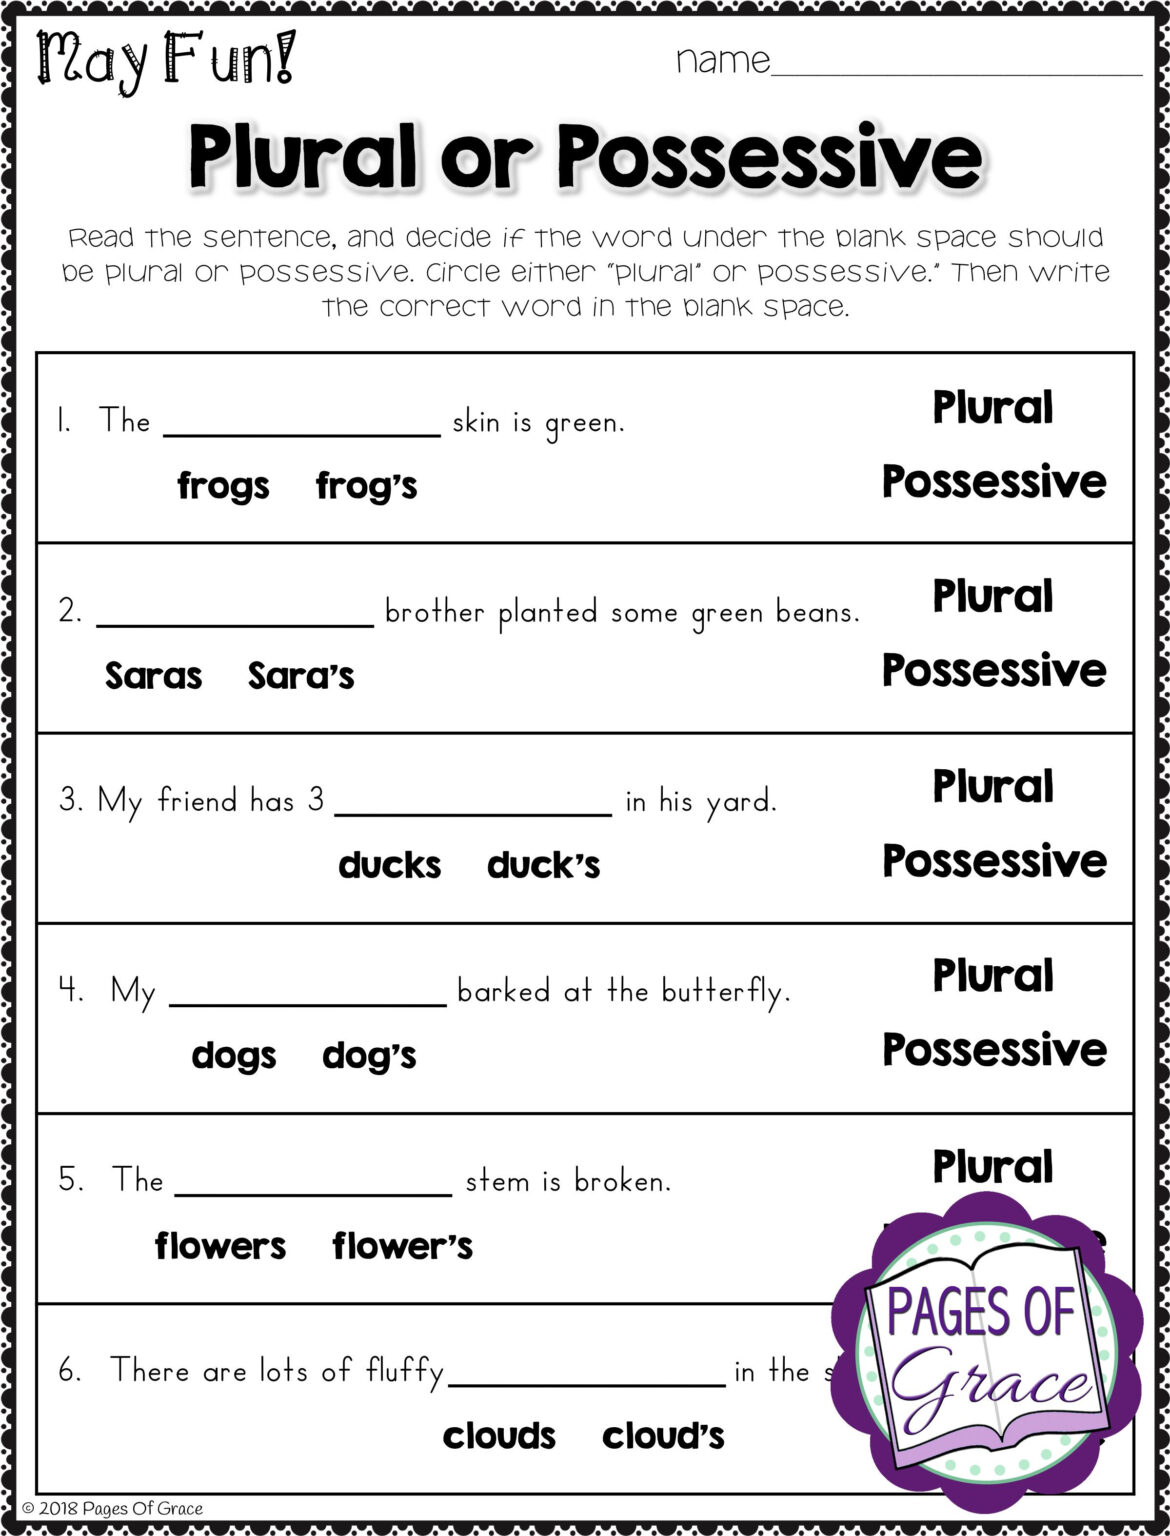 3rd-grade-worksheets-best-coloring-pages-for-kids-reading